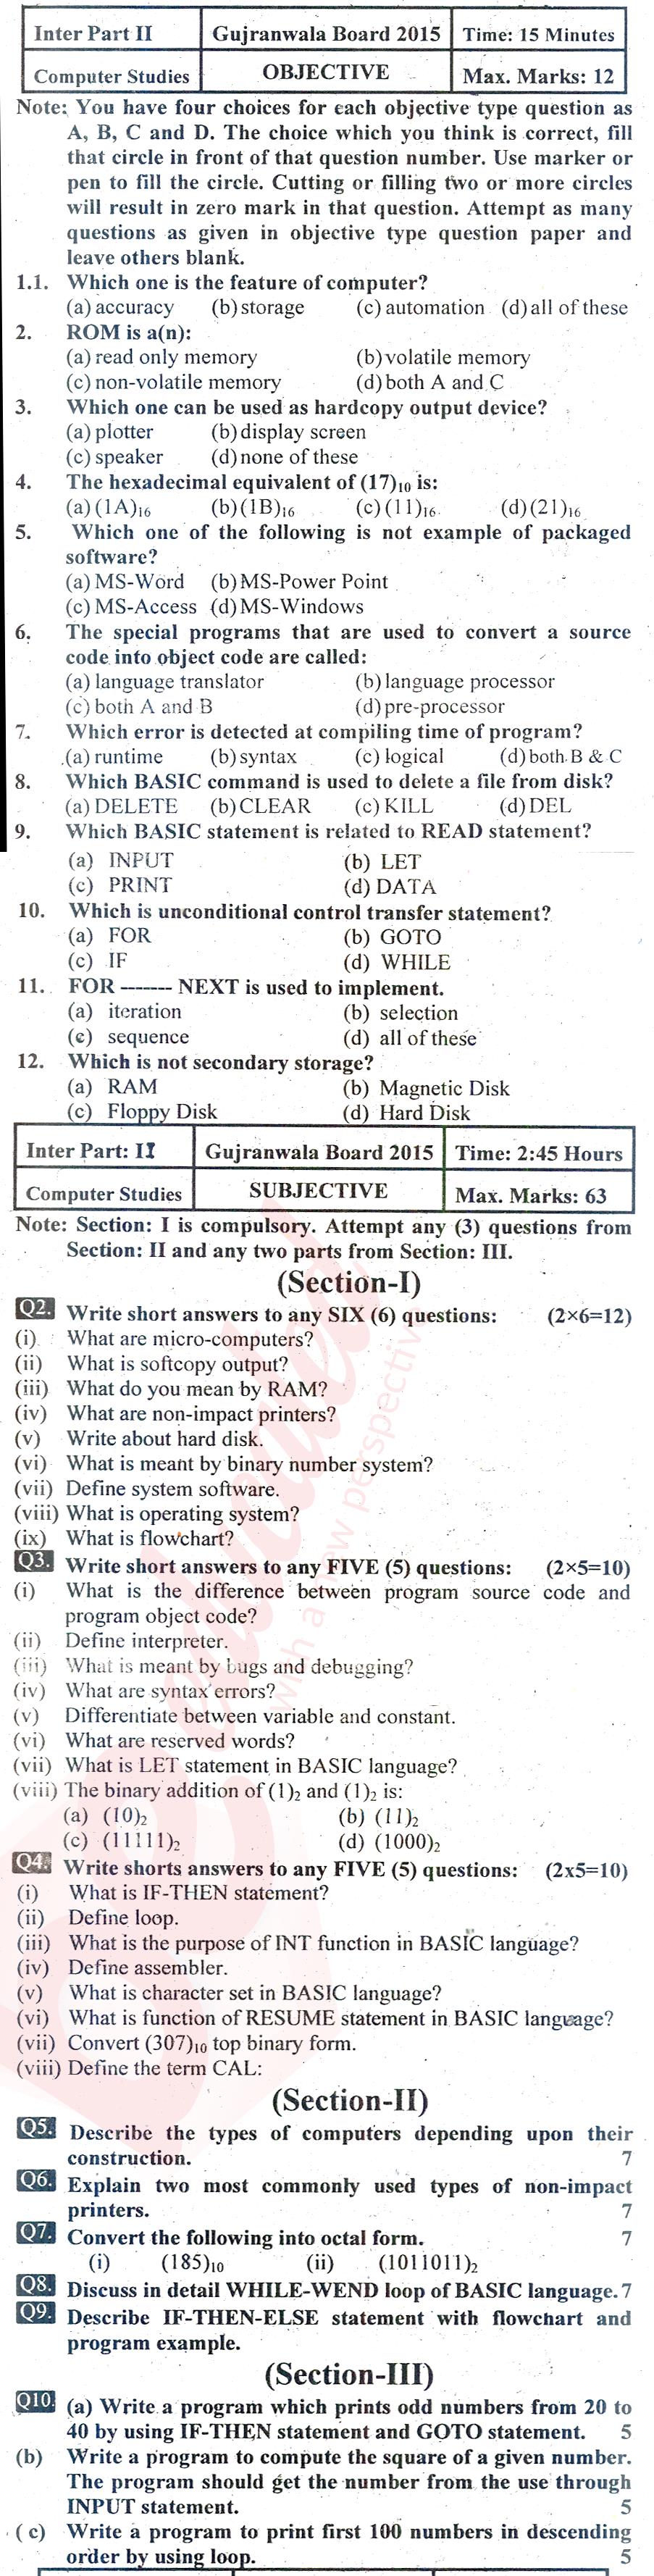 Computer Science ICOM Part 2 Past Paper Group 1 BISE Gujranwala 2015